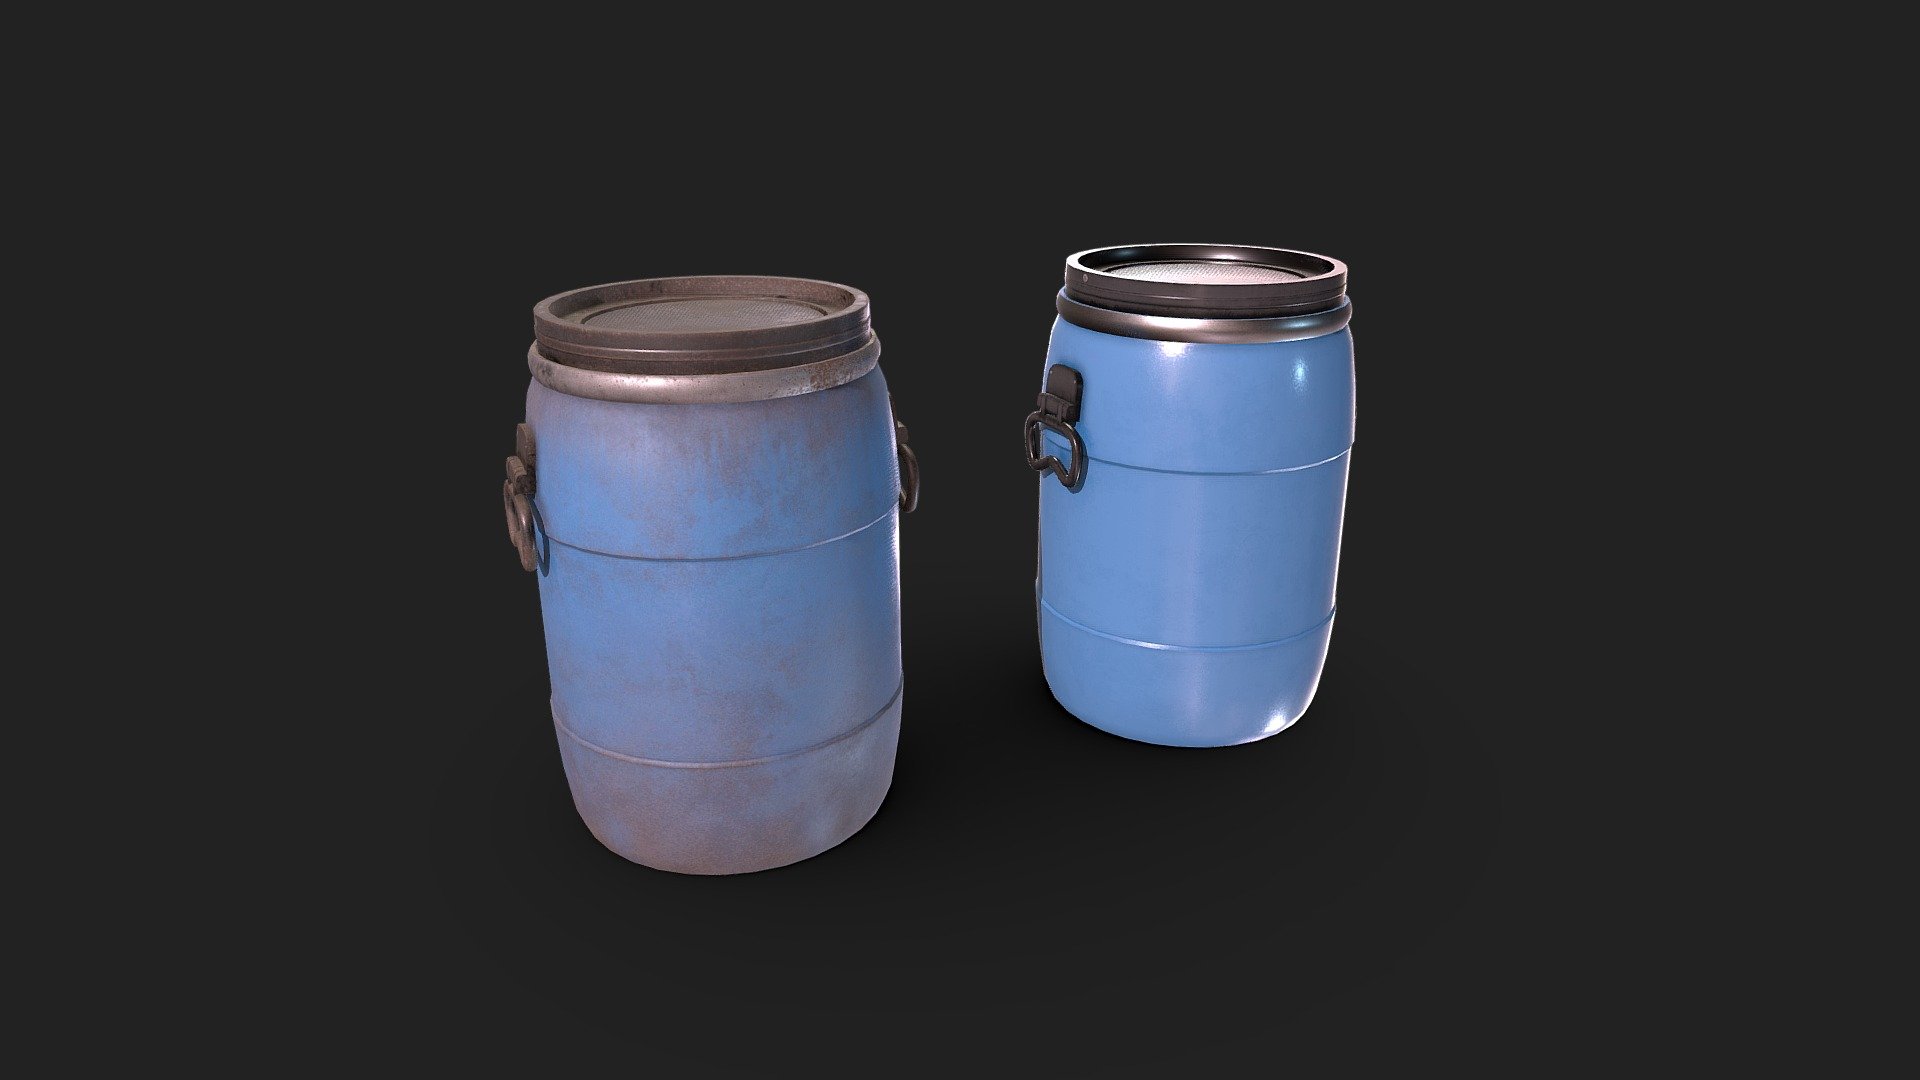 2x 2048x2048 texture packs (PBR Metal Rough, Unity HDRP, Unity Standard Metallic and UE):

PBR Metal Rough: BaseColor, AO, Height, Normal, Roughness and Metallic;

Unity HDRP: BaseColor, MaskMap, Normal;

Unity Standard Metallic: AlbedoTransparency, MetallicSmoothness, Normal;

Unreal Engine: BaseColor, Normal, OcclusionRoughnessMetallic;

The package also has the .fbx, .obj, .dae and .blend file 3d model